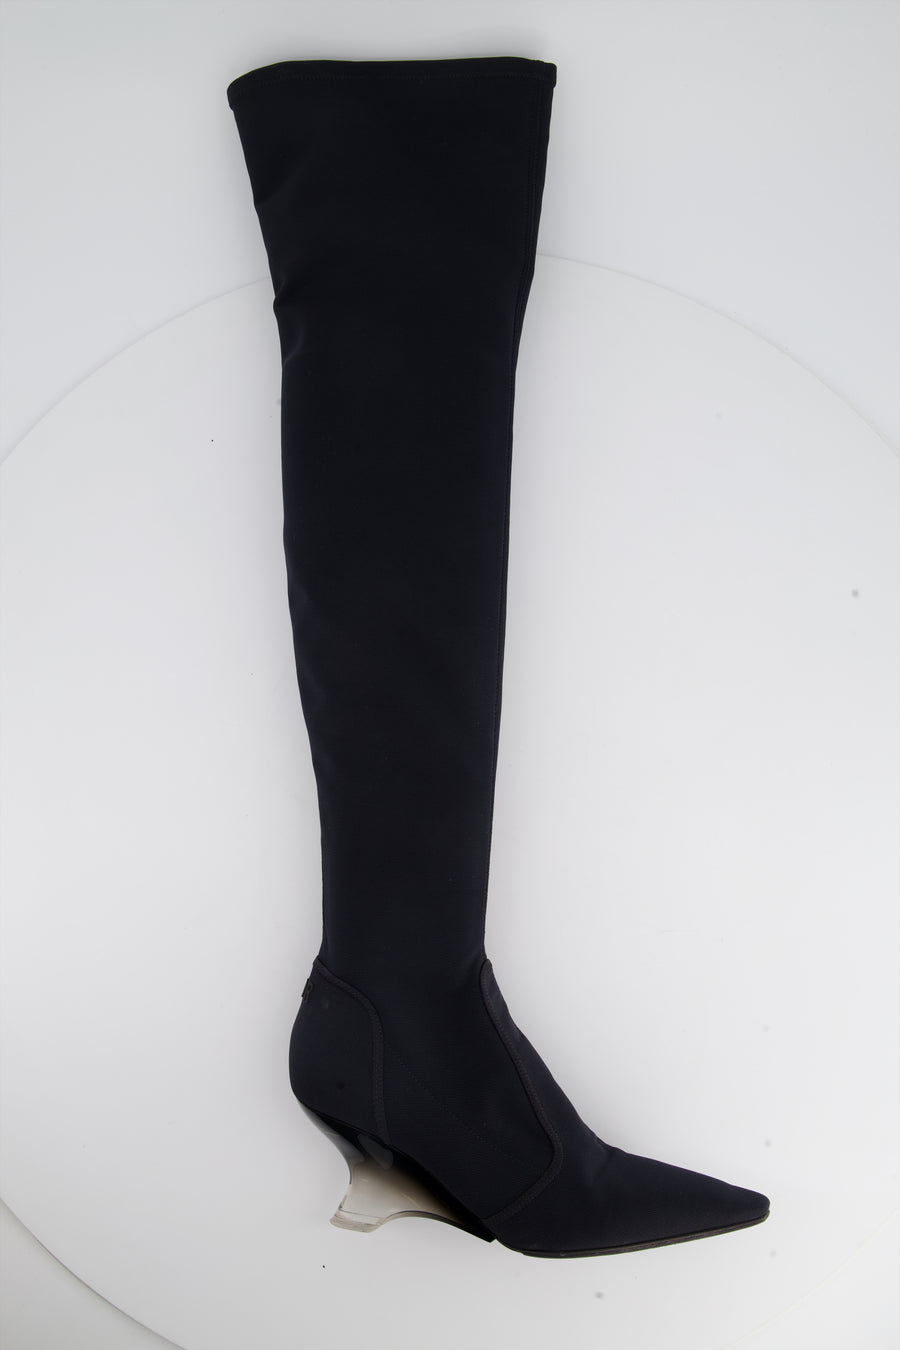 Christian Dior Navy Over-the-Knee Canvas Boots with PVC Heel Detail Size EU 39.5